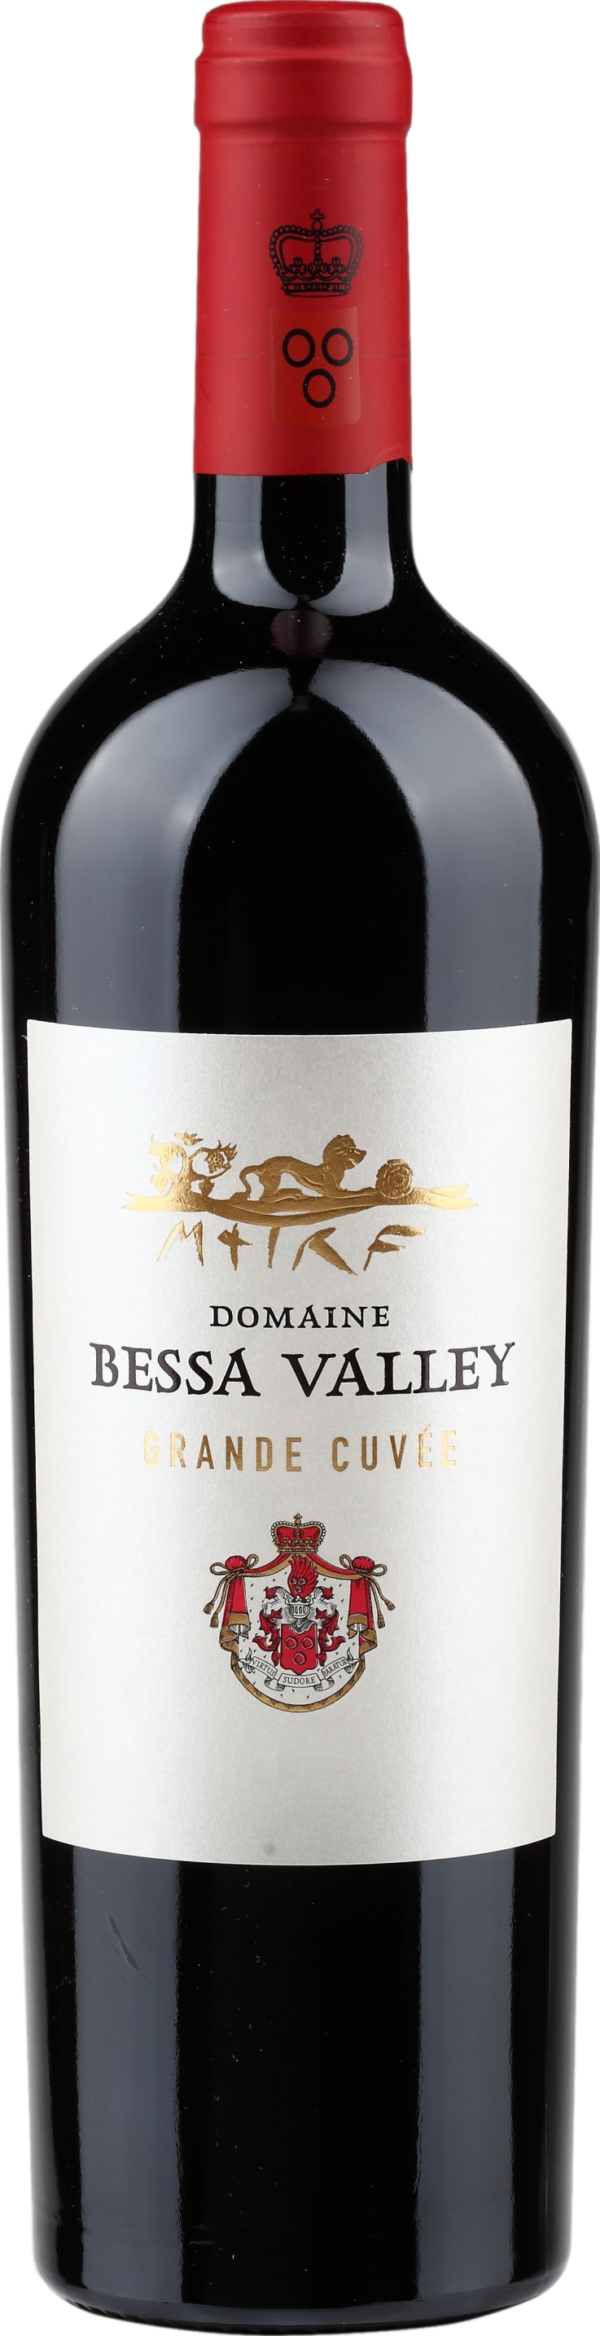 Product image of Bessa Valley Grande Cuvee 2019 from 8wines